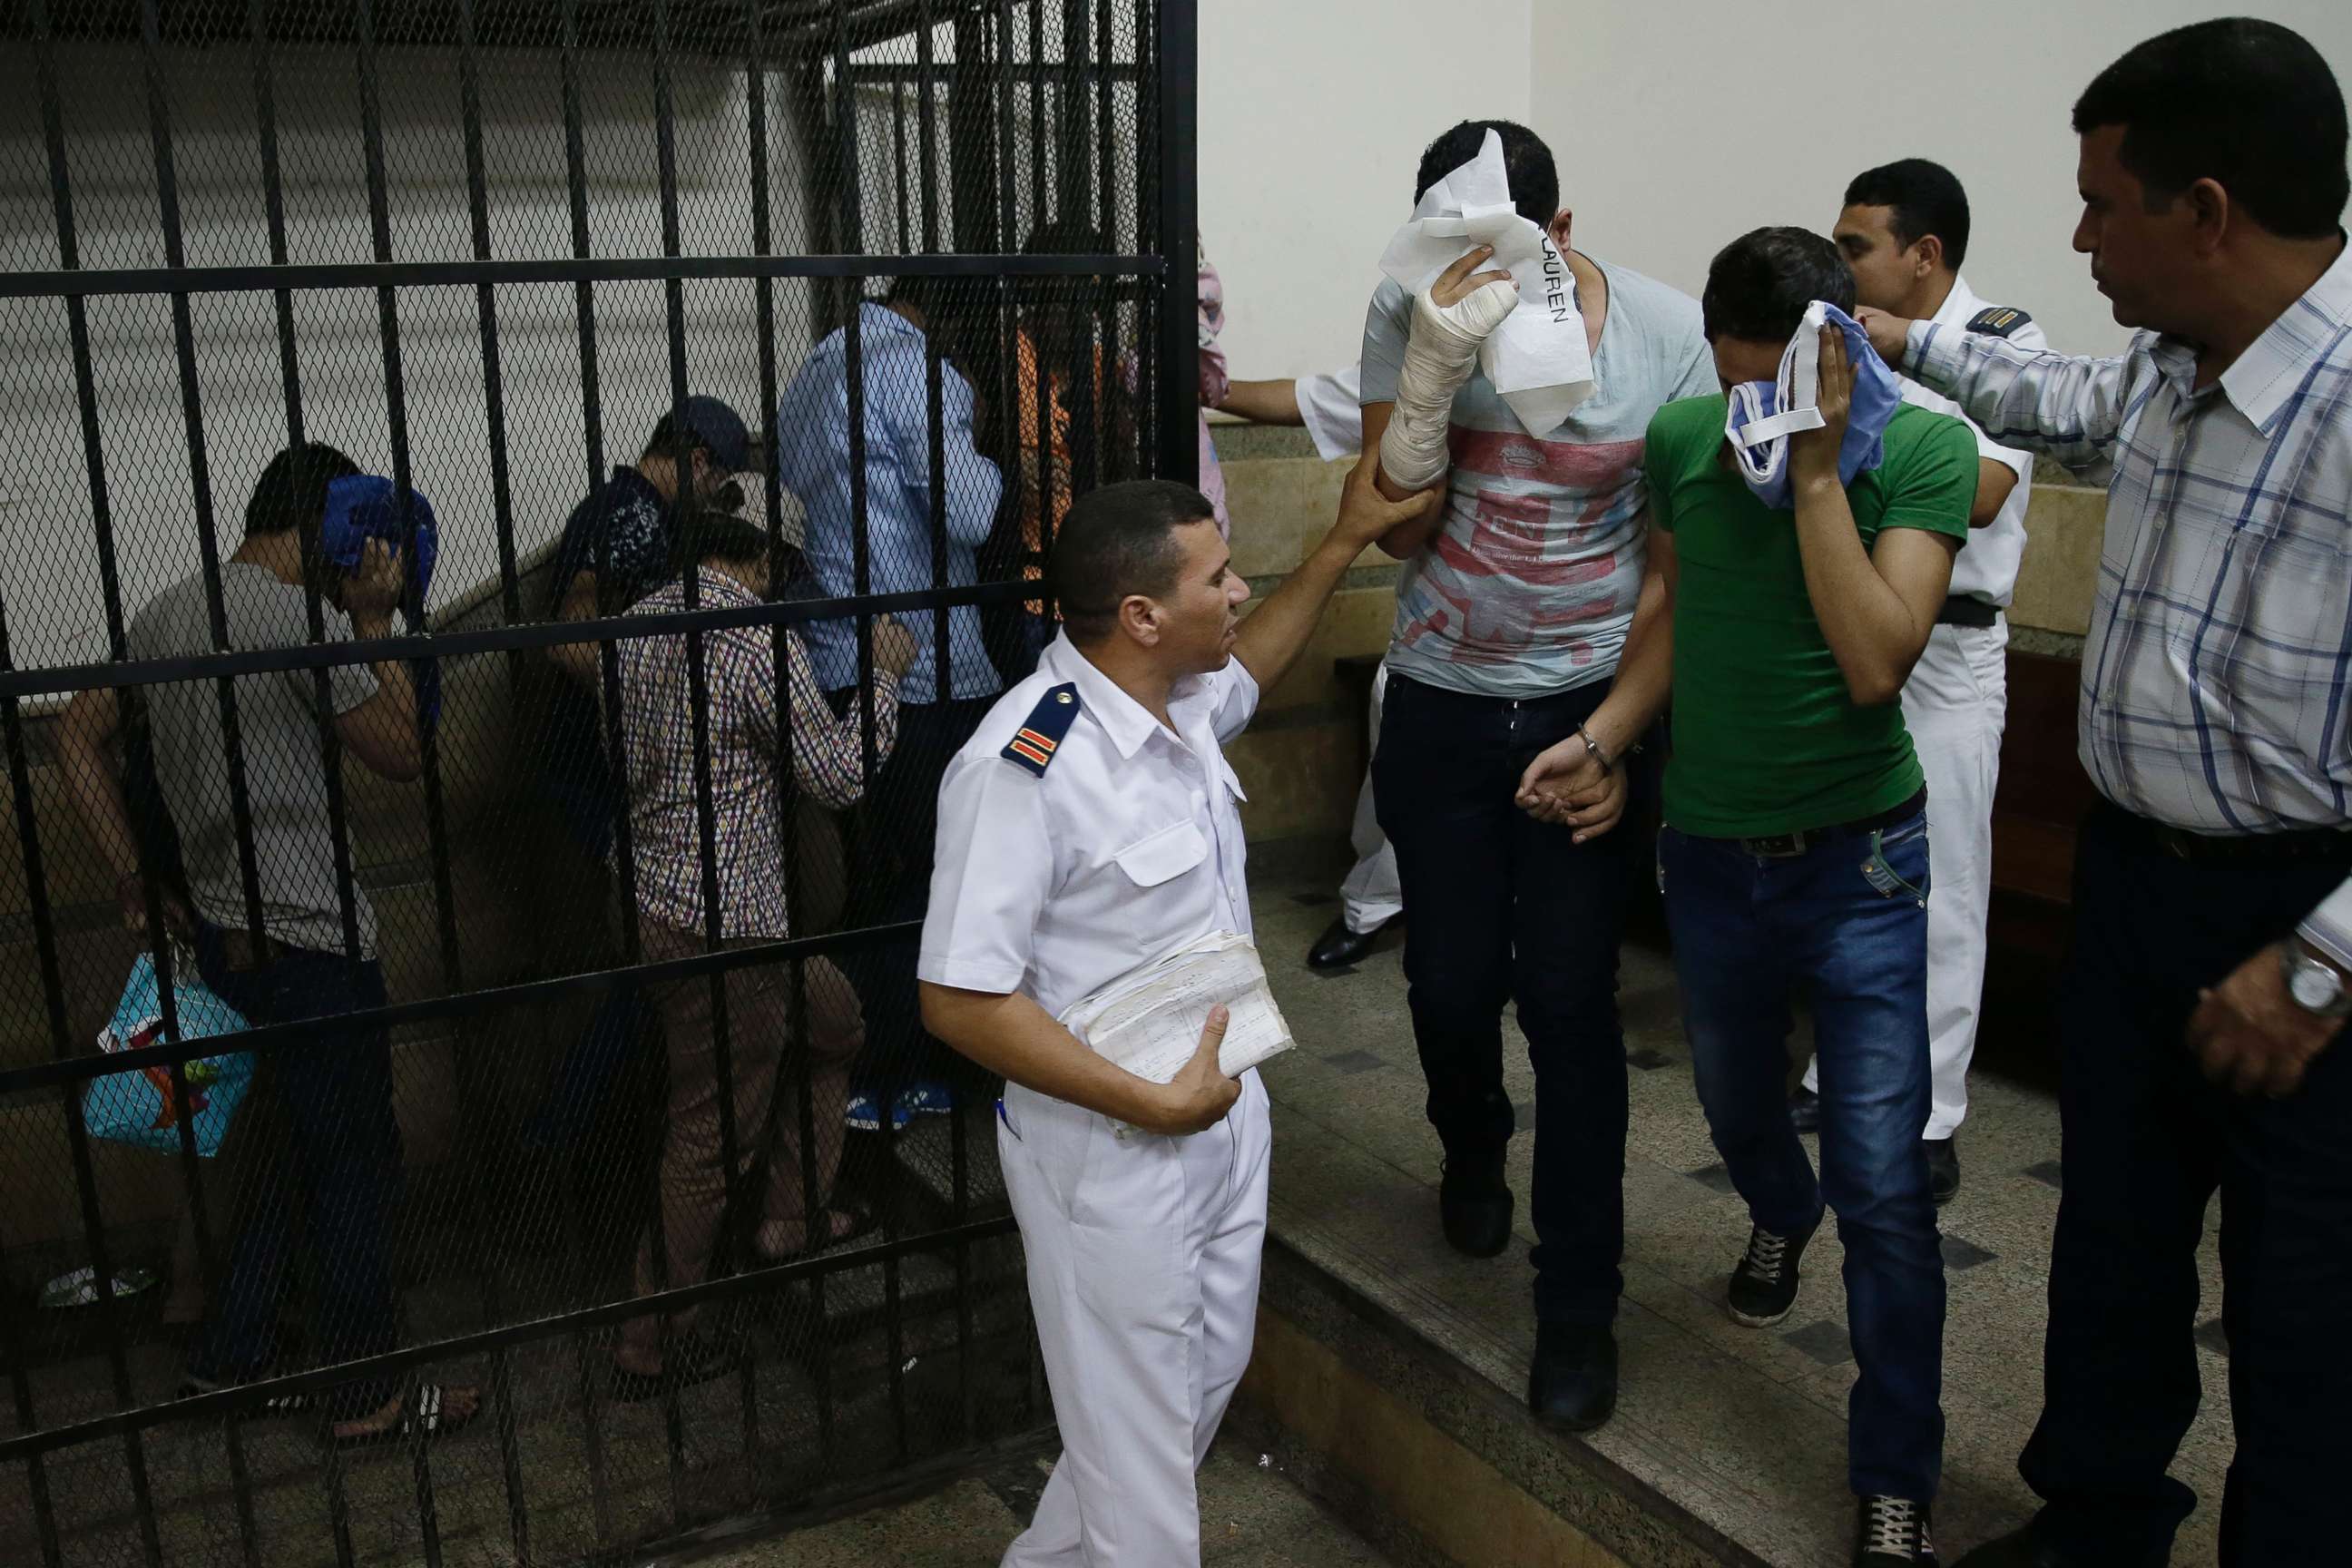 PHOTO: Eight Egyptian men convicted for "inciting debauchery" following their appearance in a video of an alleged same-sex wedding party on a Nile boat leave the defendant's cage in a courtroom in Cairo, Egypt, Nov. 1, 2014. 